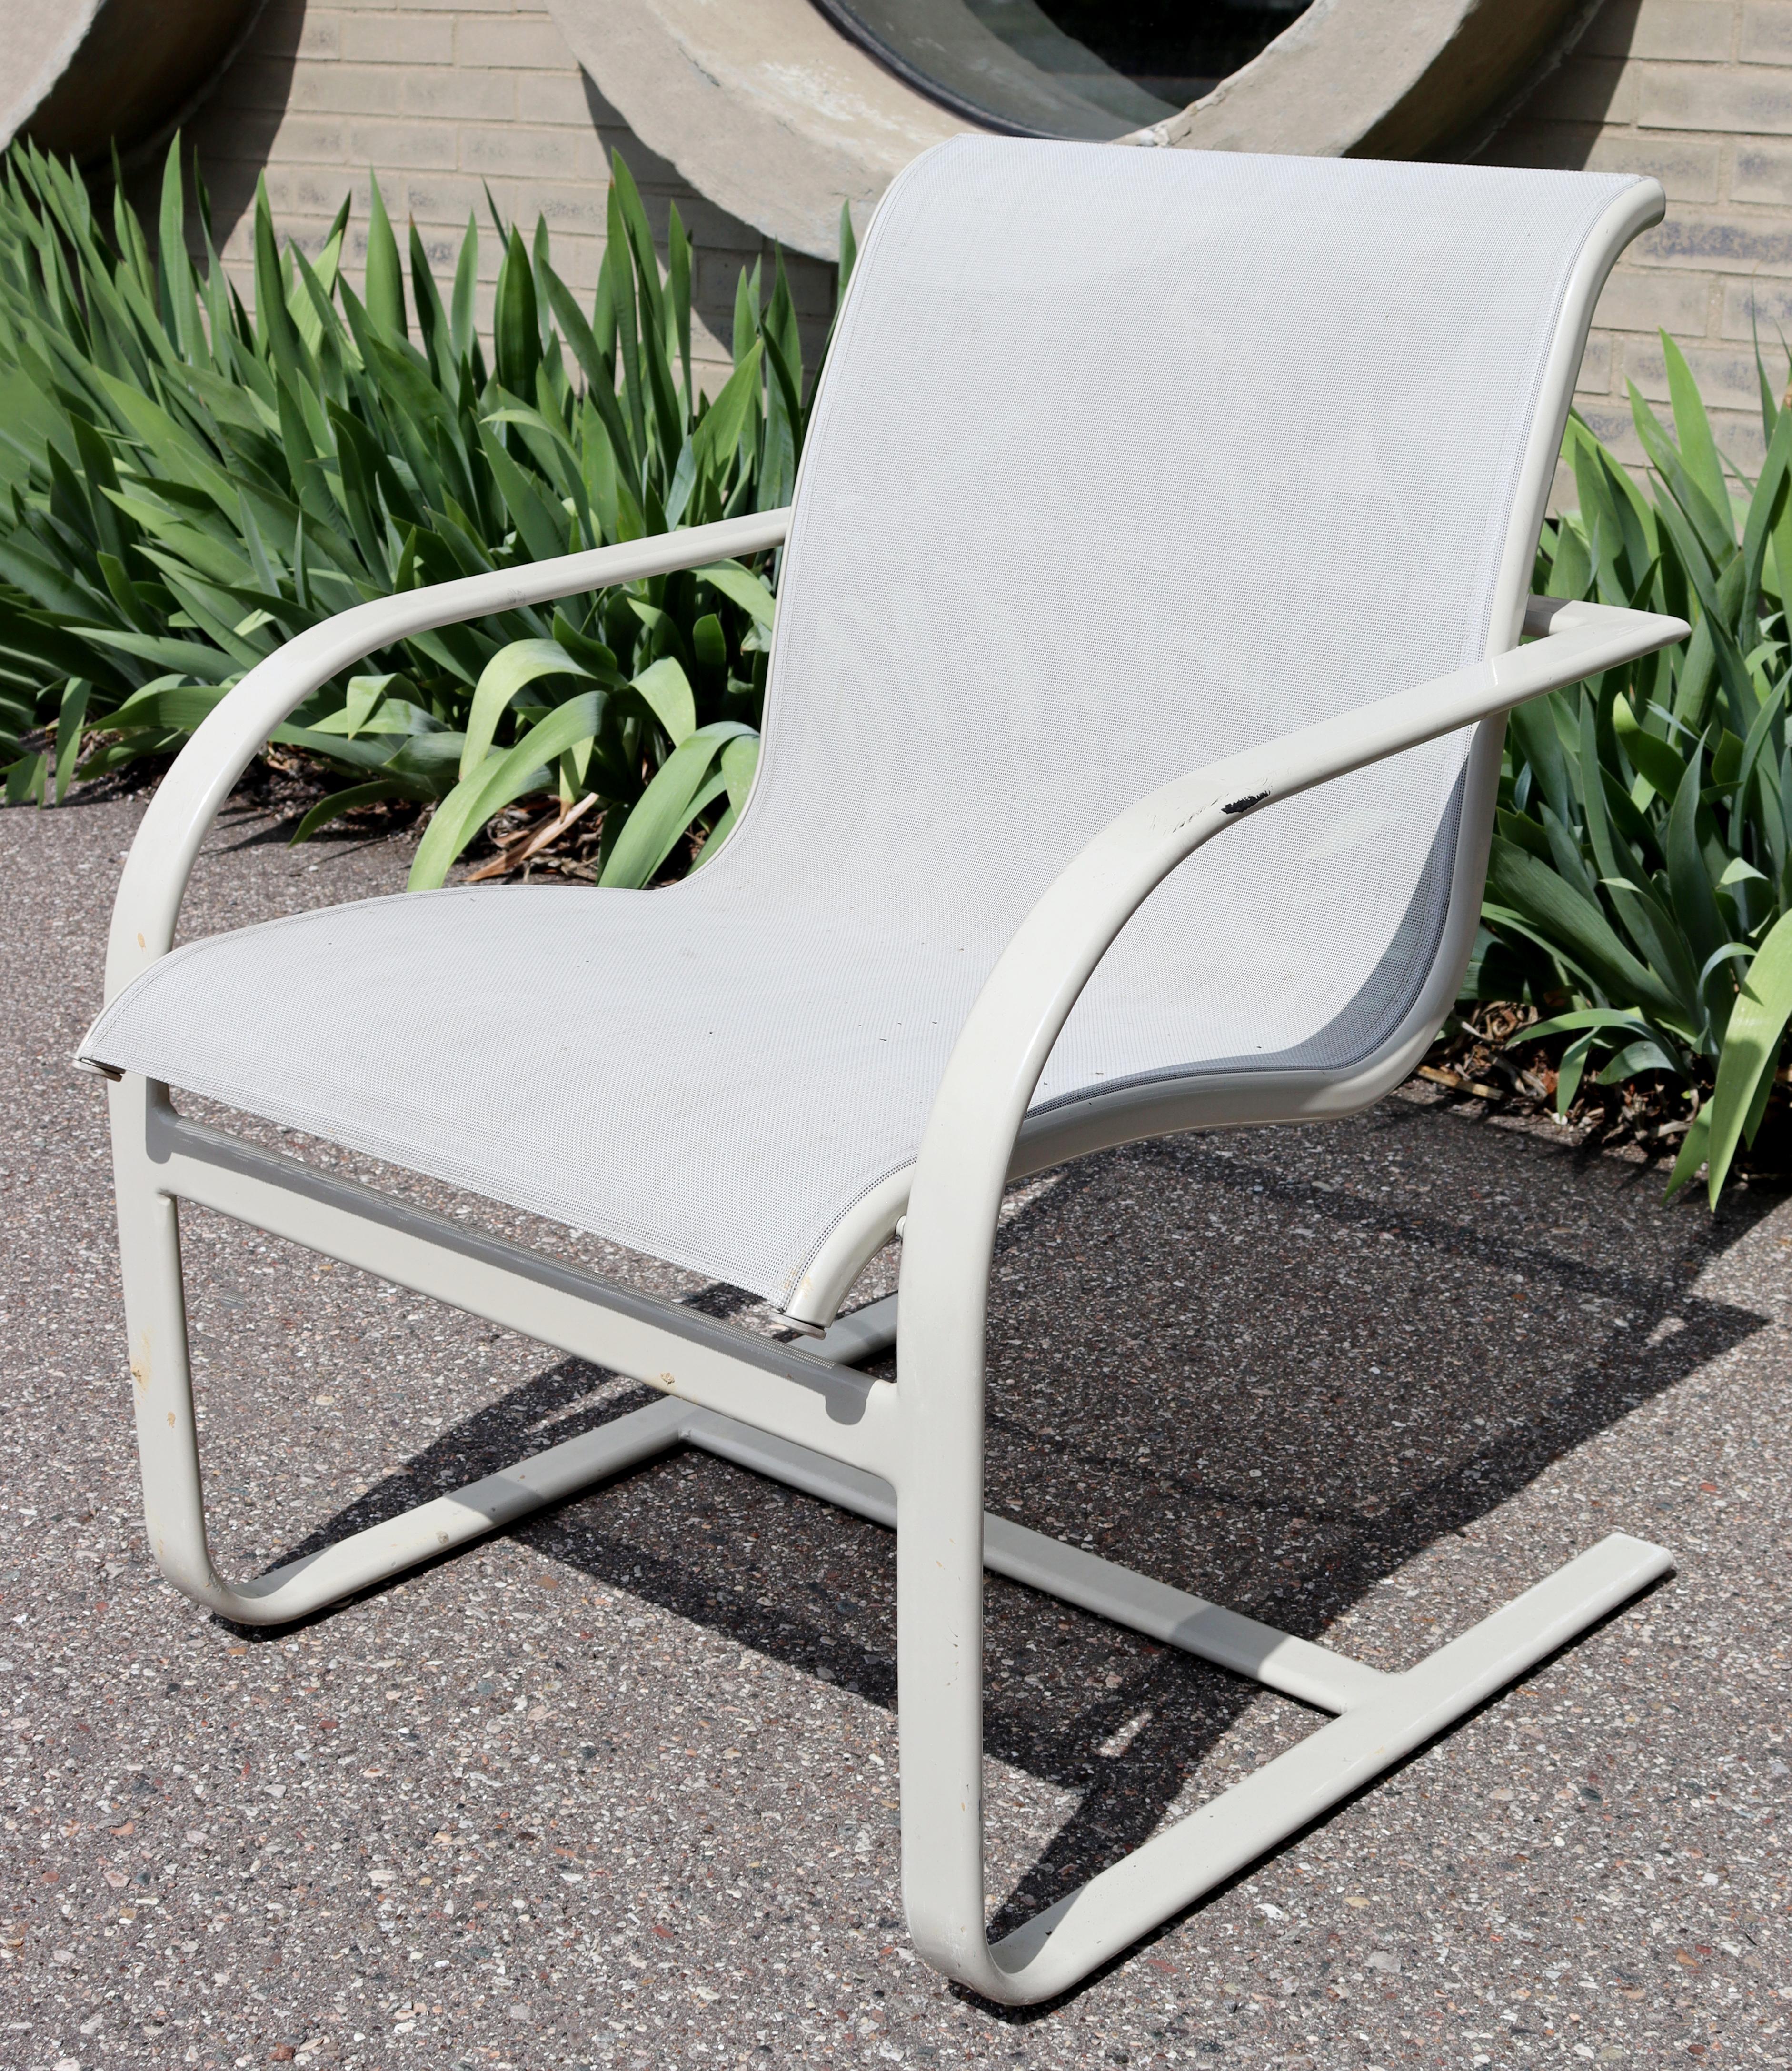 For your consideration is an incredible, outdoor patio set of four rocking armchairs, made of white painted metal and with mesh backs and seats, by Brown Jordan, circa the 1970s. In very good vintage condition. The dimensions are 24.5